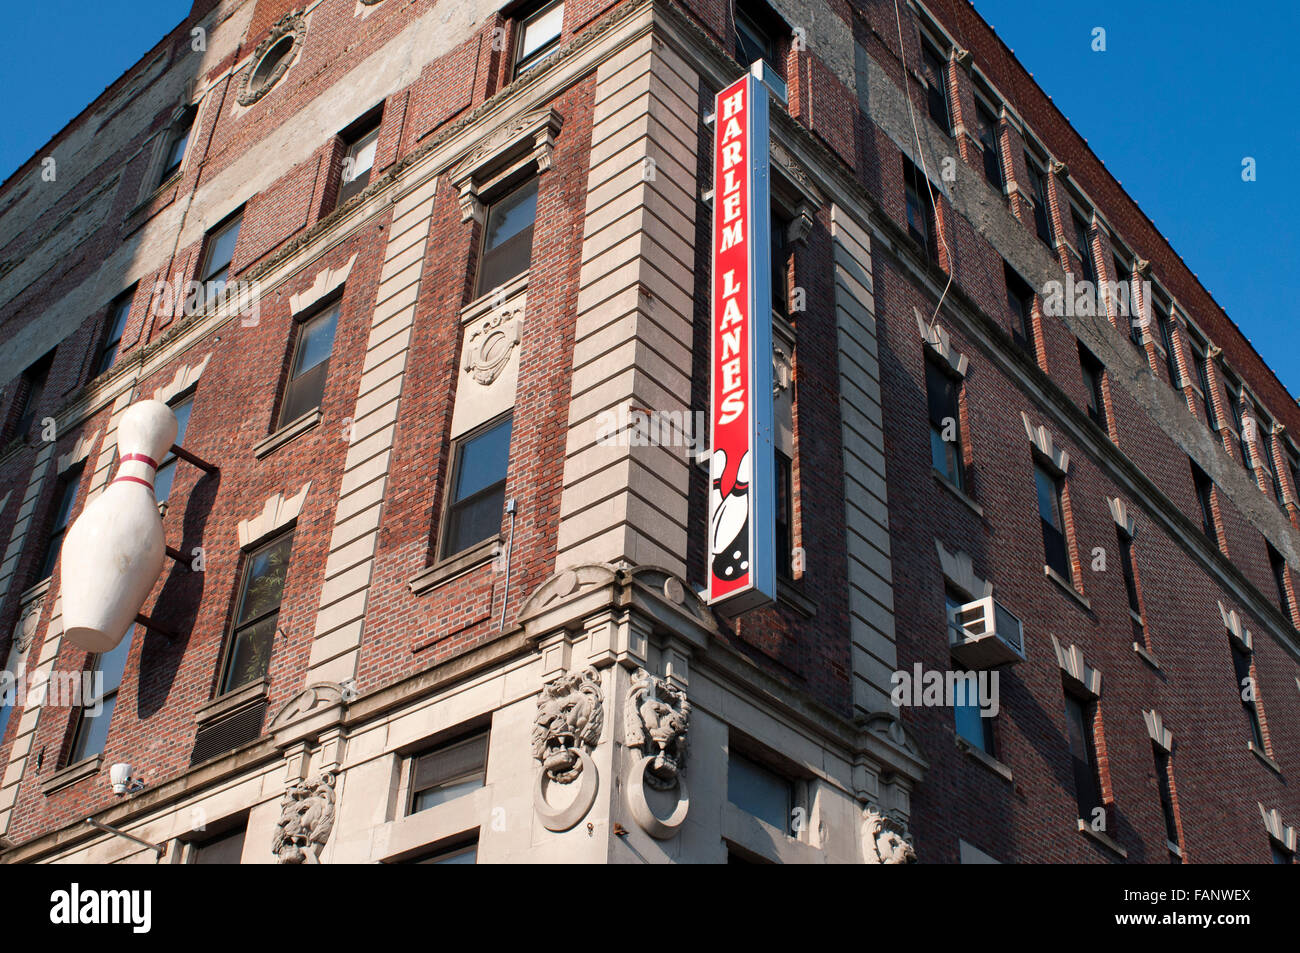 Alhambra Theatre Building, Harlem. Harlem lanes, New York, USA. A bowling pin and sign on the facade of a building advertise a bowling alley that is no longer there in the neighborhood of Harlem. Stock Photo